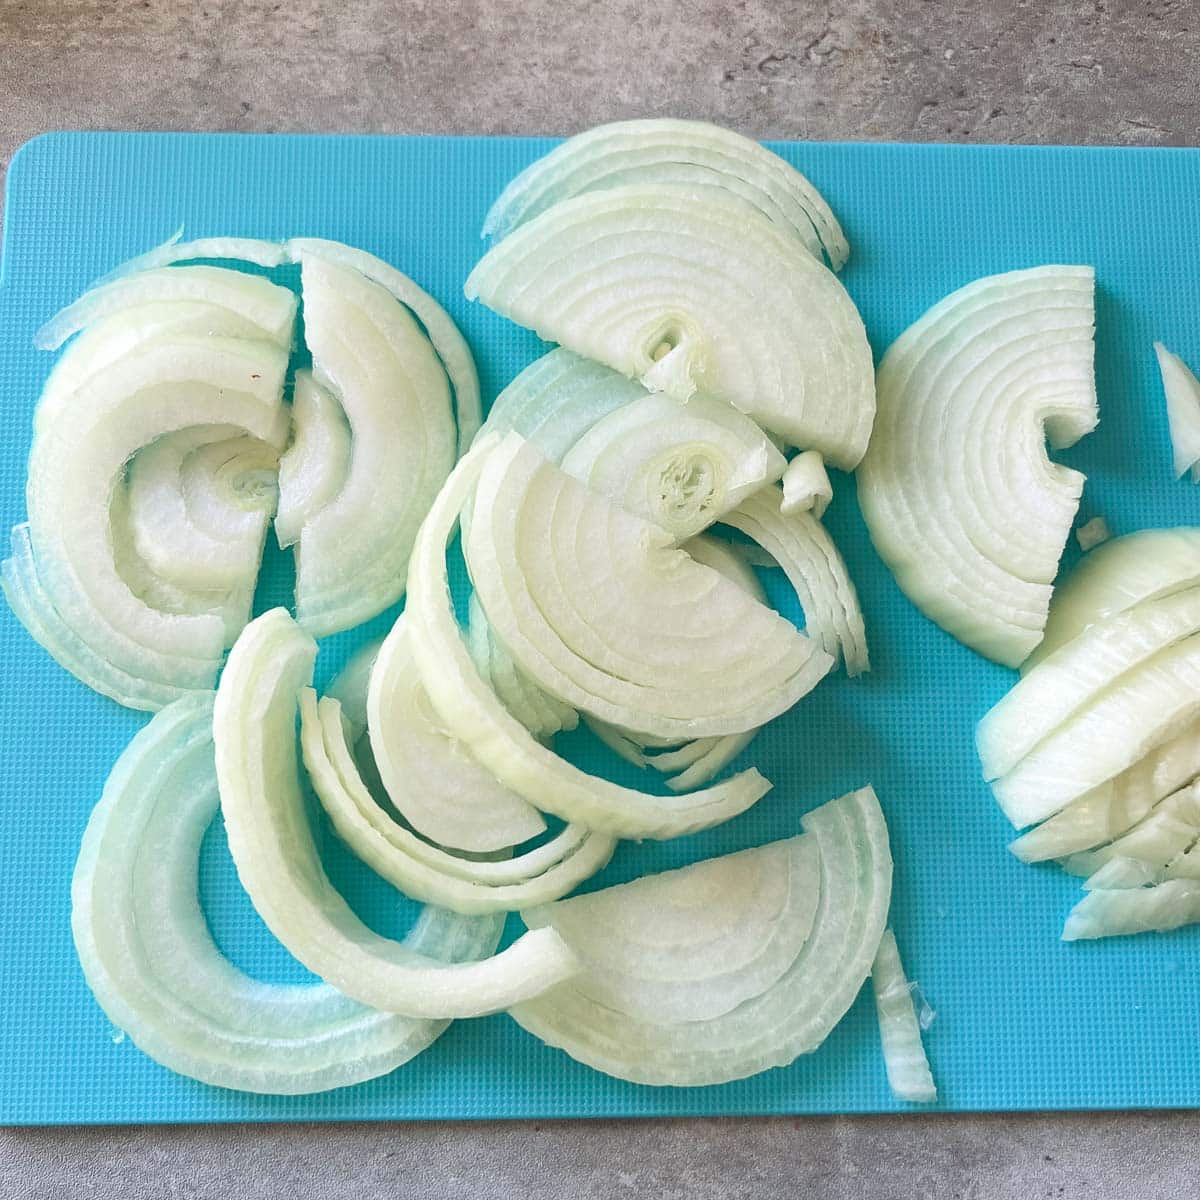 thinly sliced onions on cutting board